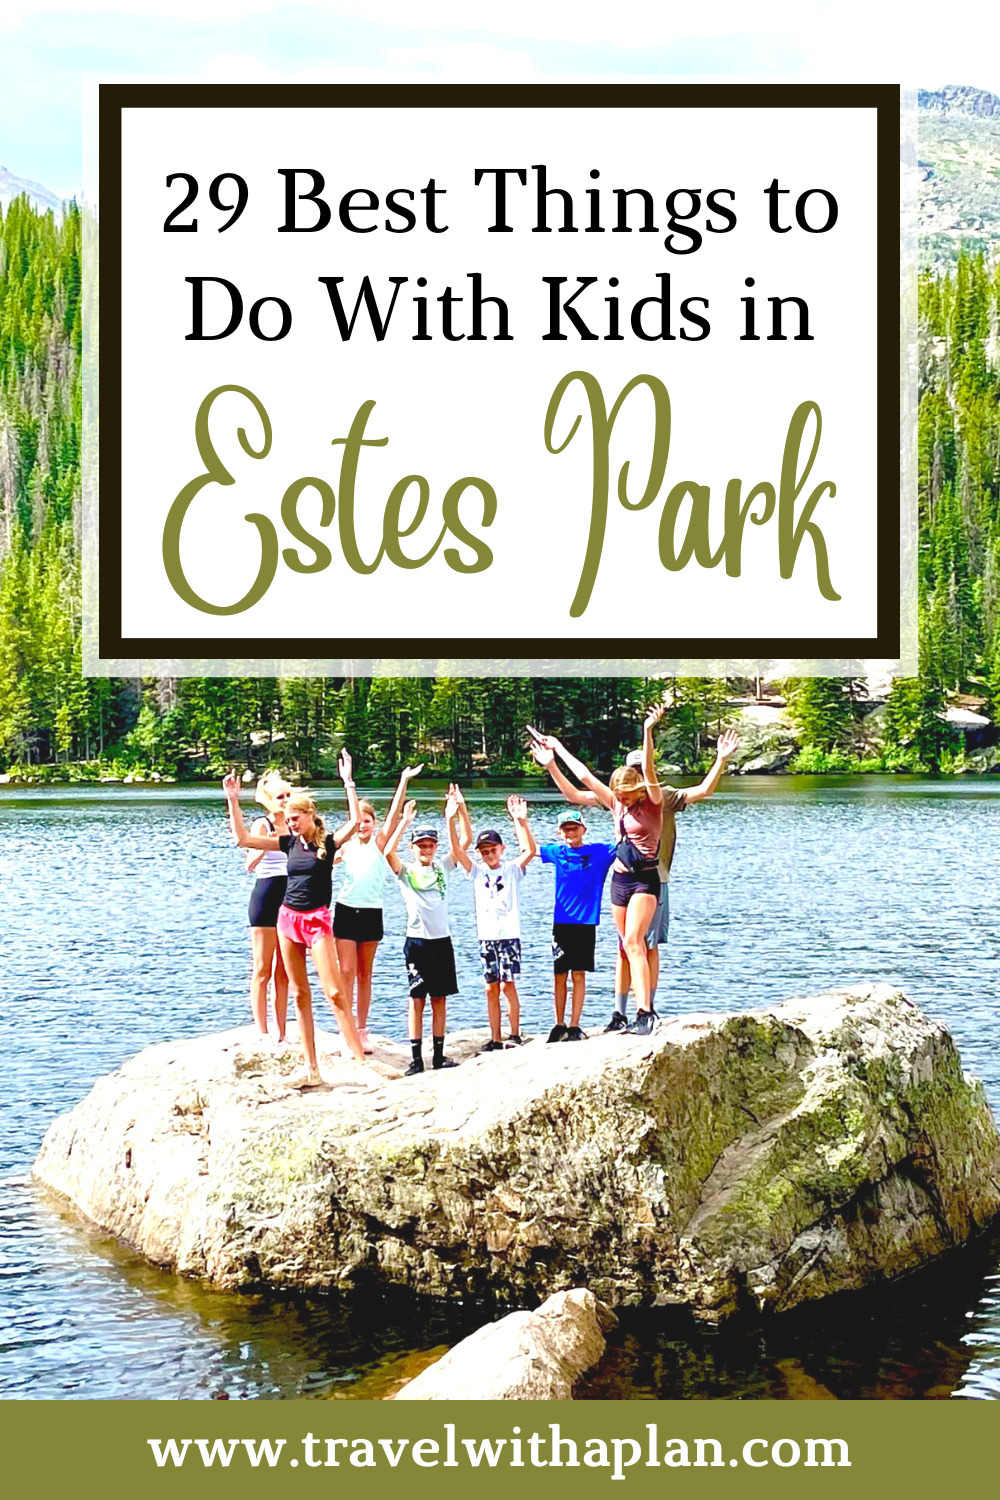 Check out the best things to do in Estes Park with kids from top US family travel blog, Travel With A Plan!